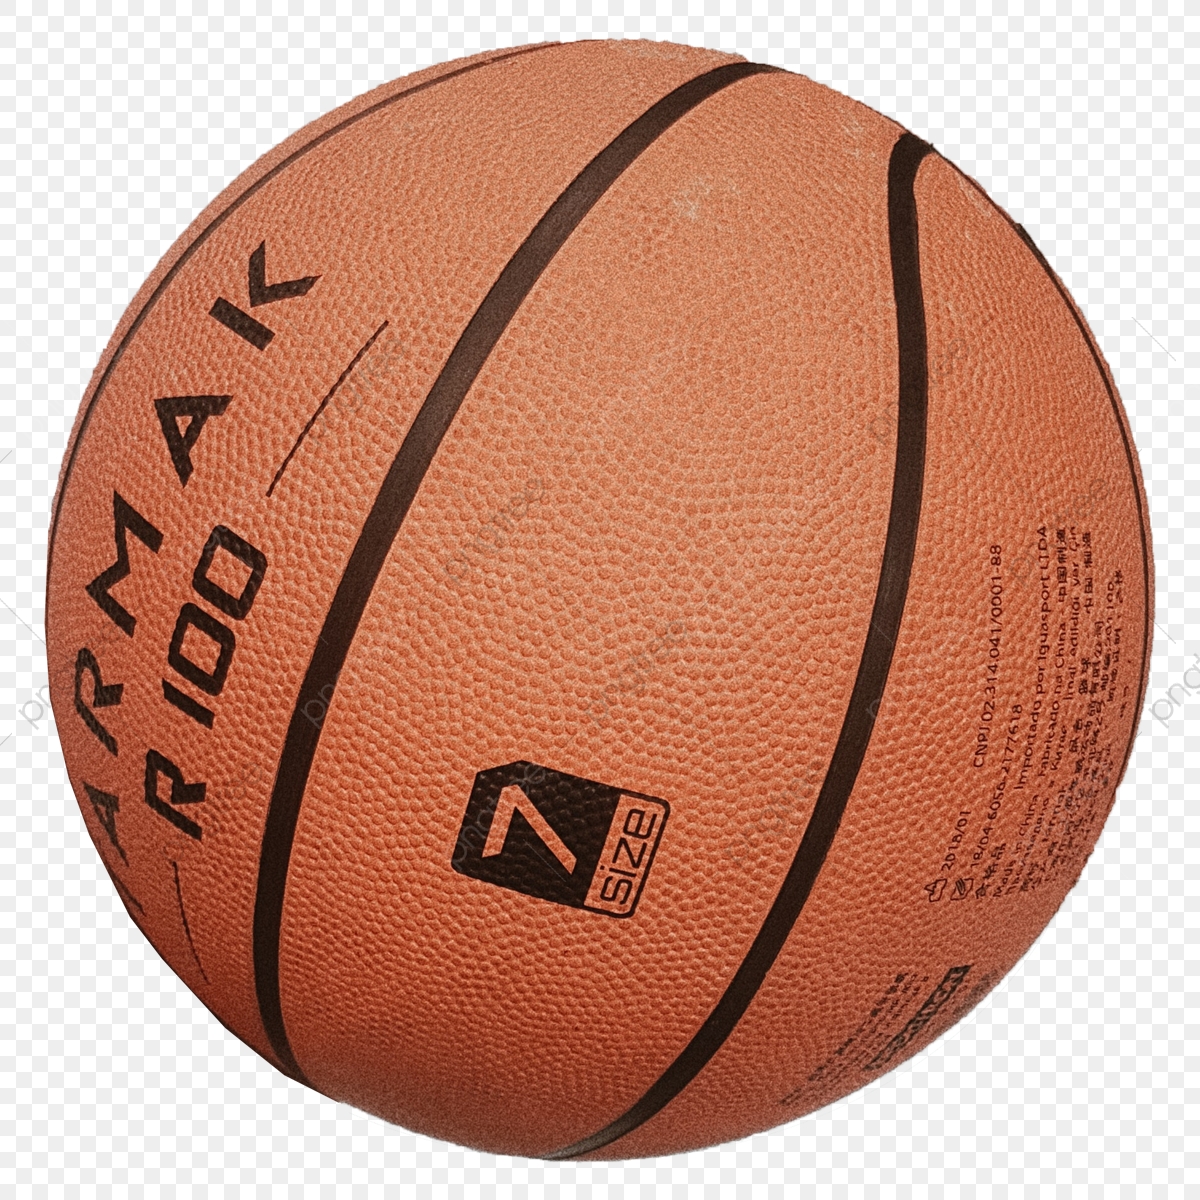 Athletes ball png transparent. Clipart basketball file